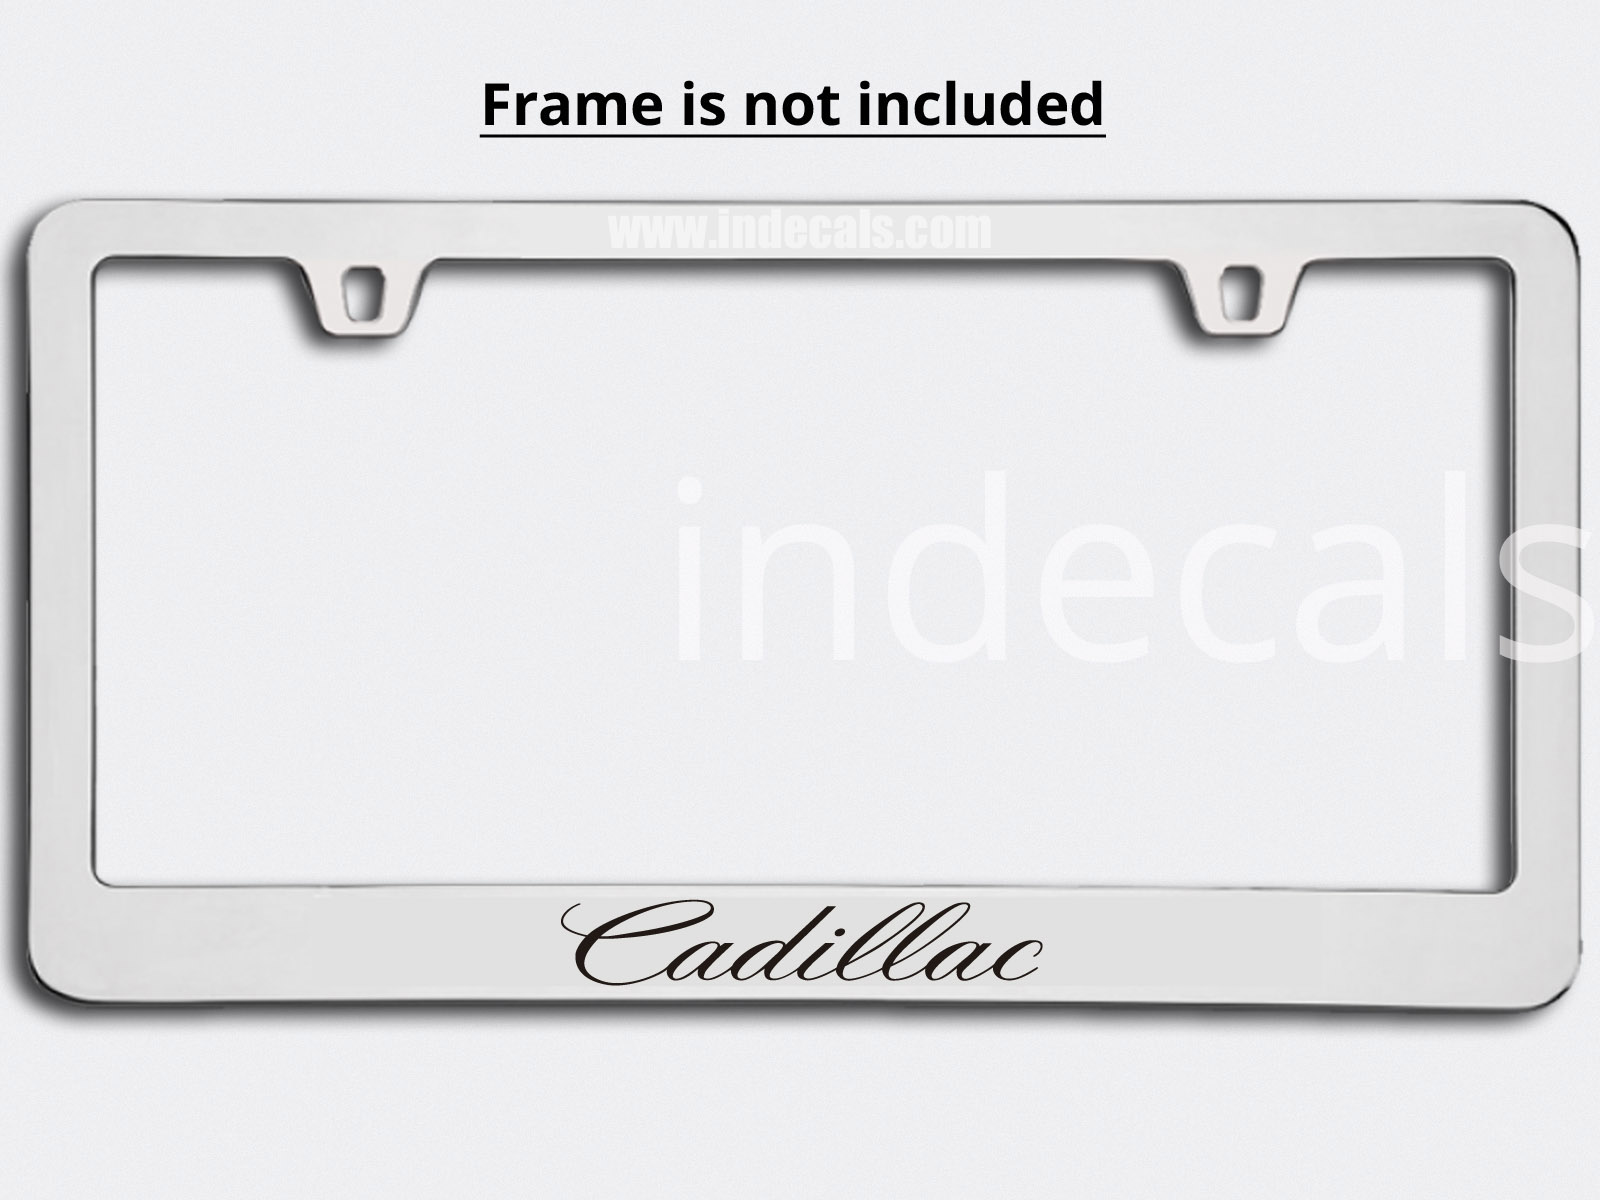 3 x Cadillac Stickers for Plate Frame - Black